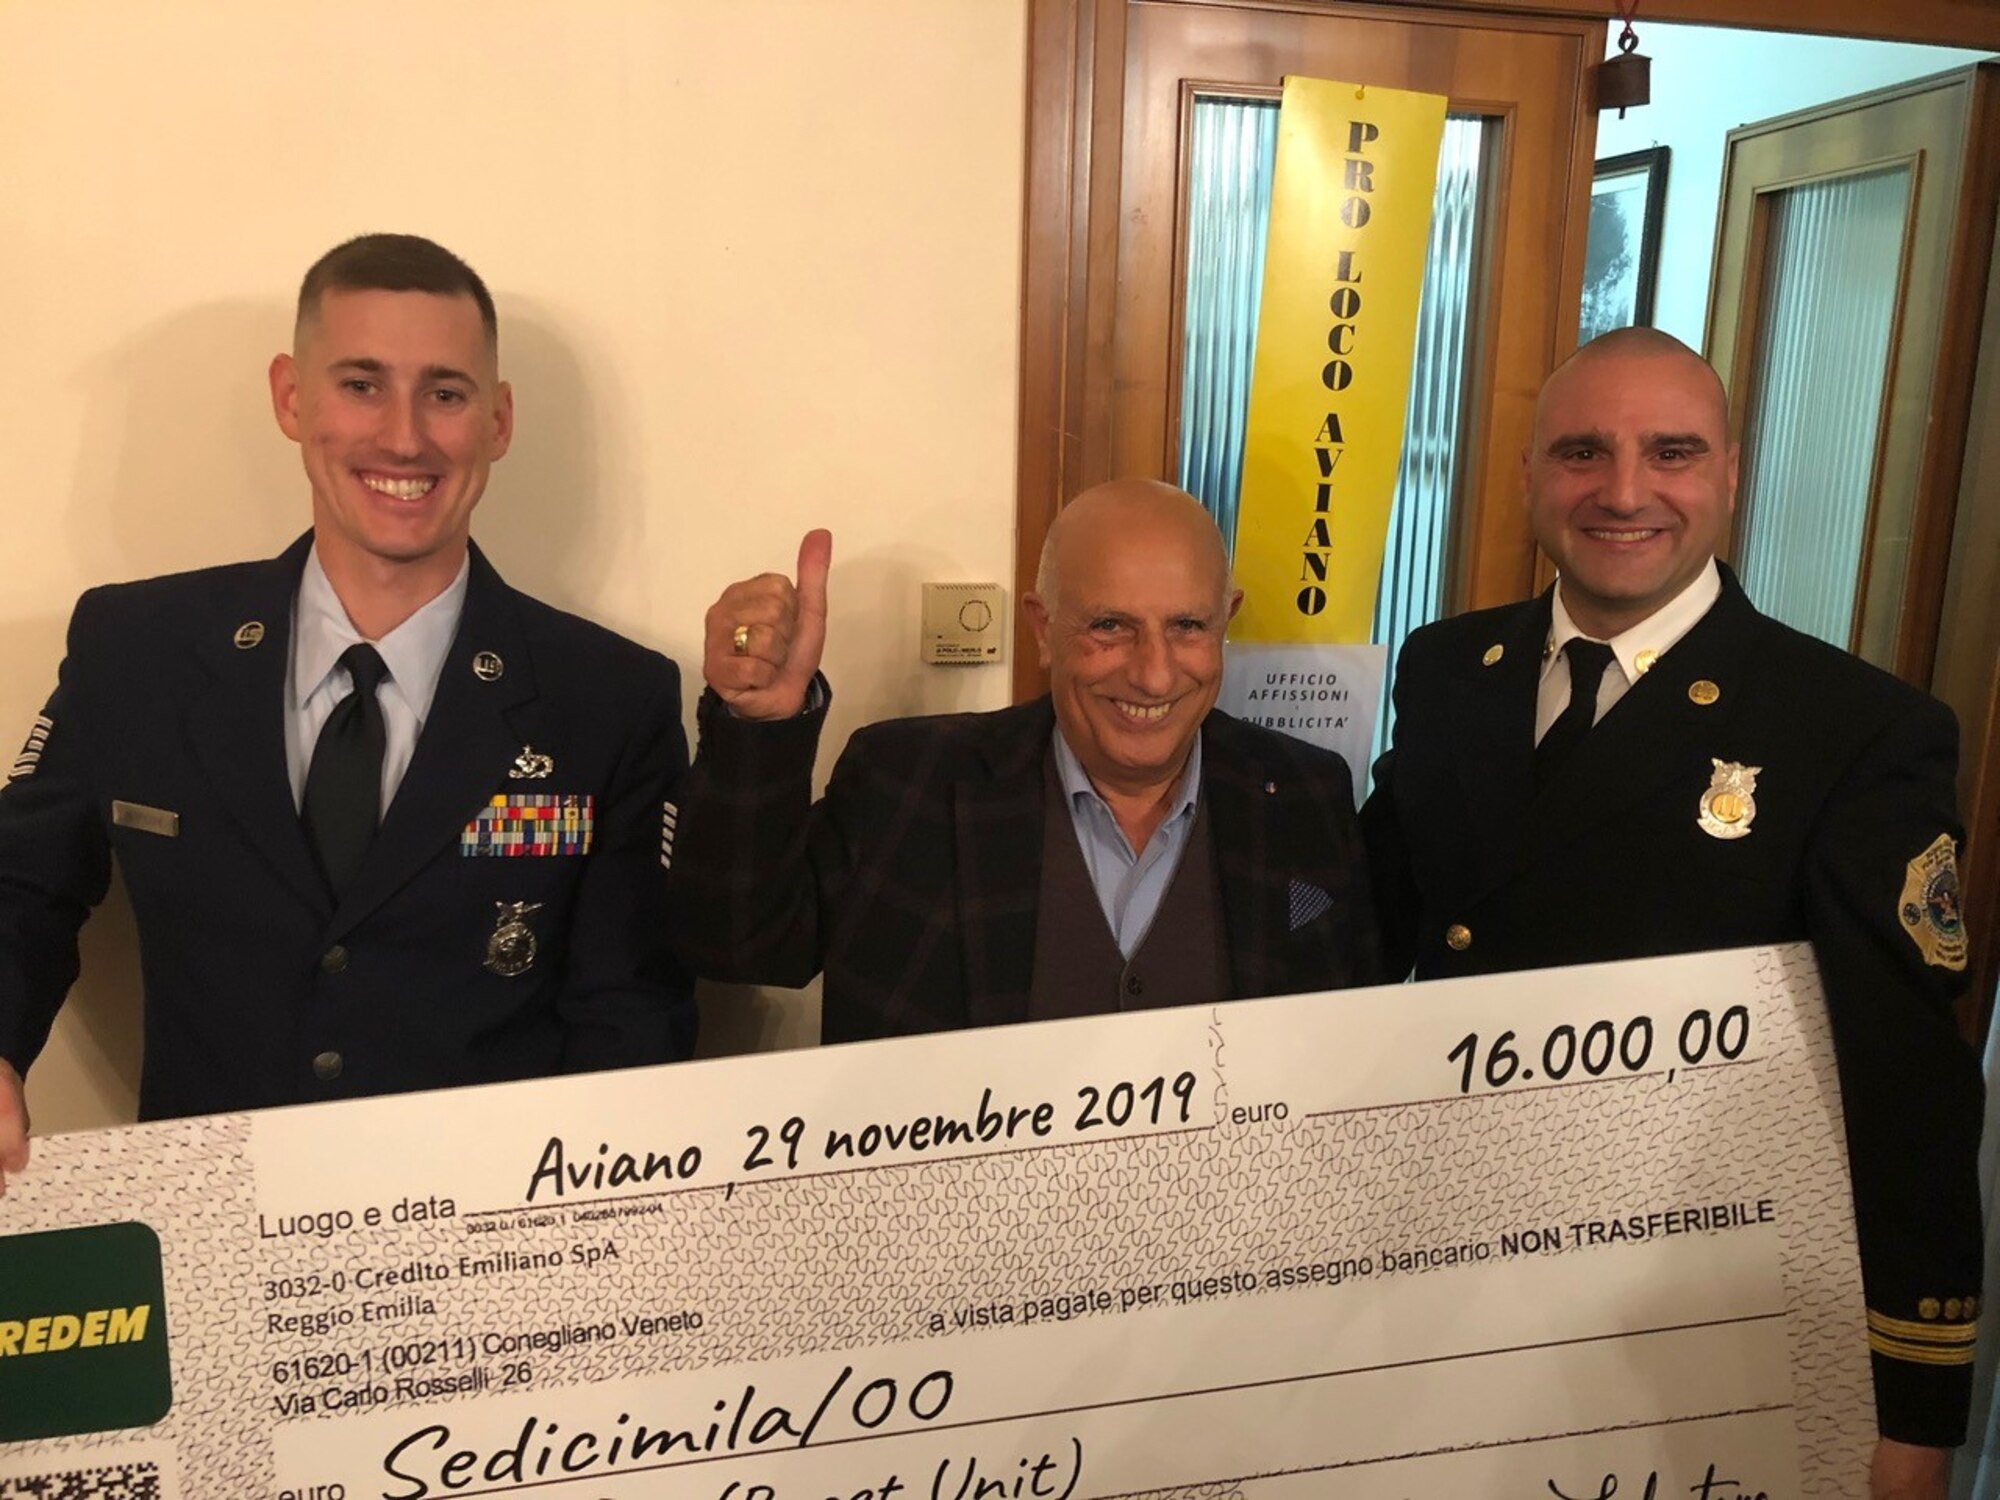 Tech. Sgt. Robert Perricone, 31st Civil Engineer Squadron assistant chief of health and safety (left), Salvatore Brunno, Volunteer Association of Aviano president (middle), and Fabrizio La Marca, 31st Civil Engineer Squadron firefighter (right), hold a check while posing for a photo in Aviano, Italy, Nov. 29, 2019. The Aviano Firefighter Association sold custom shirts and hoodies to raise money for breast cancer awareness. (Courtesy photo)